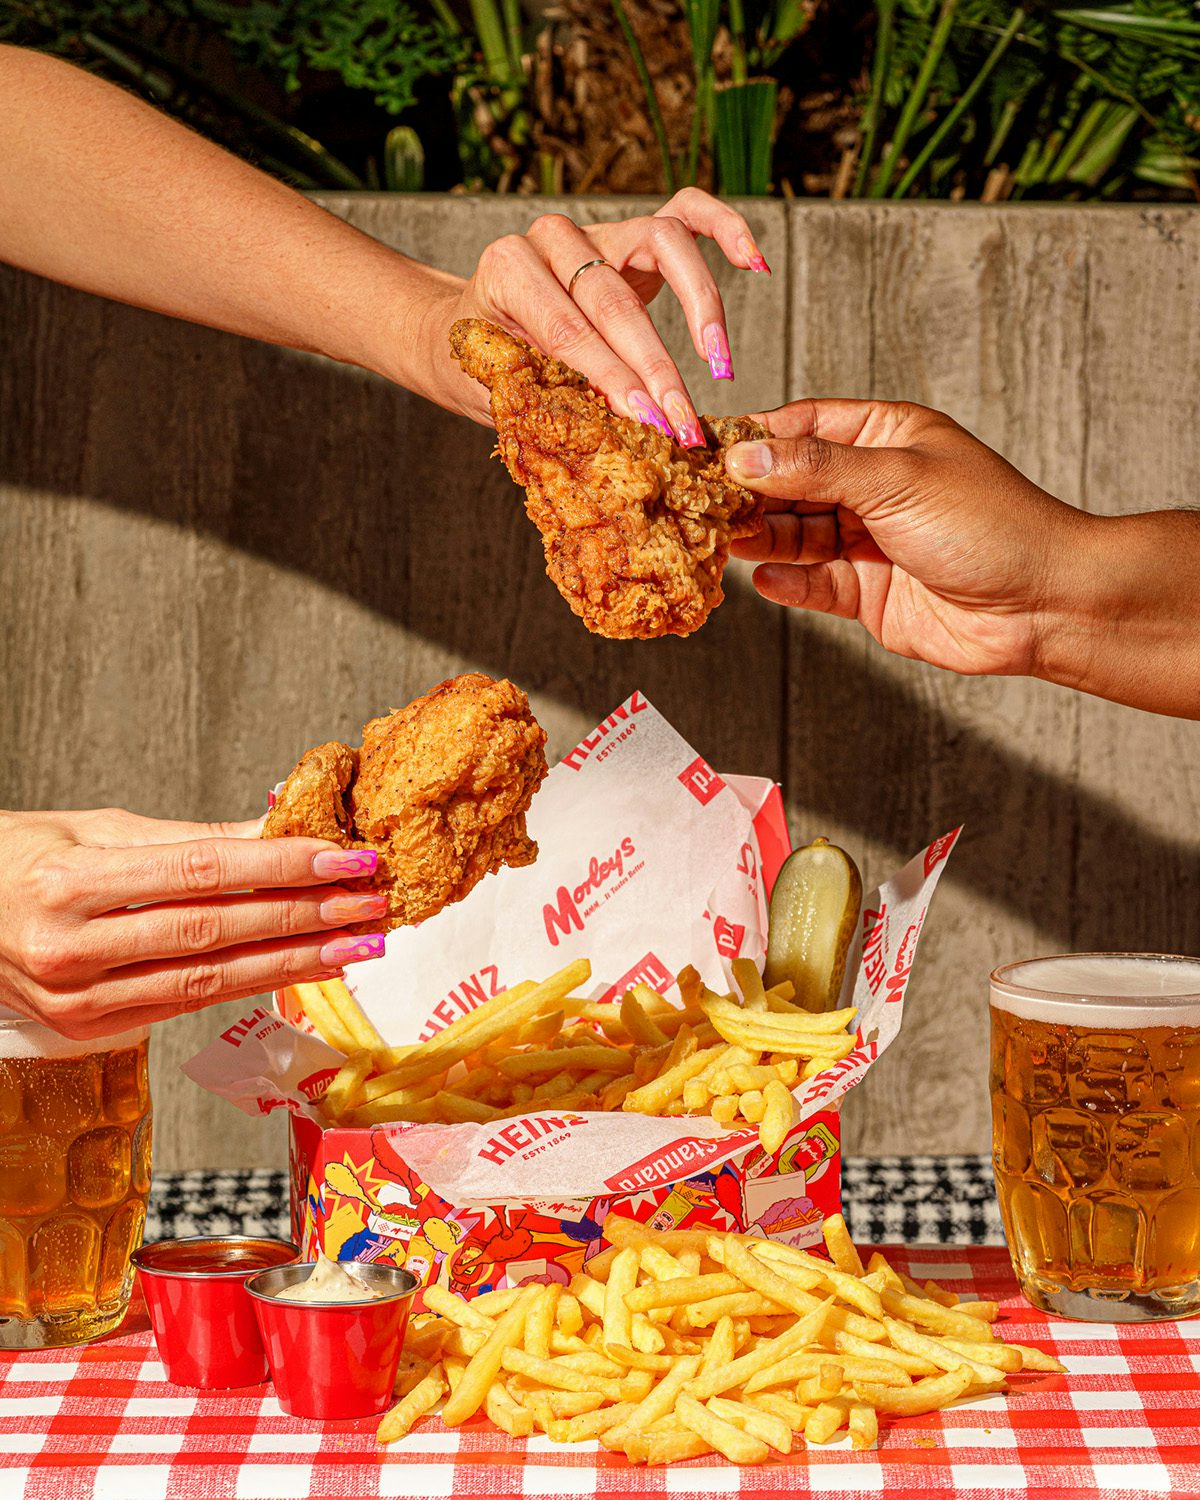 Photograph showing two people holding onto the same piece of fried chicken, leaning over a tablecloth covered in chips, pots of sauce, a box of chicken, and two glasses of beer